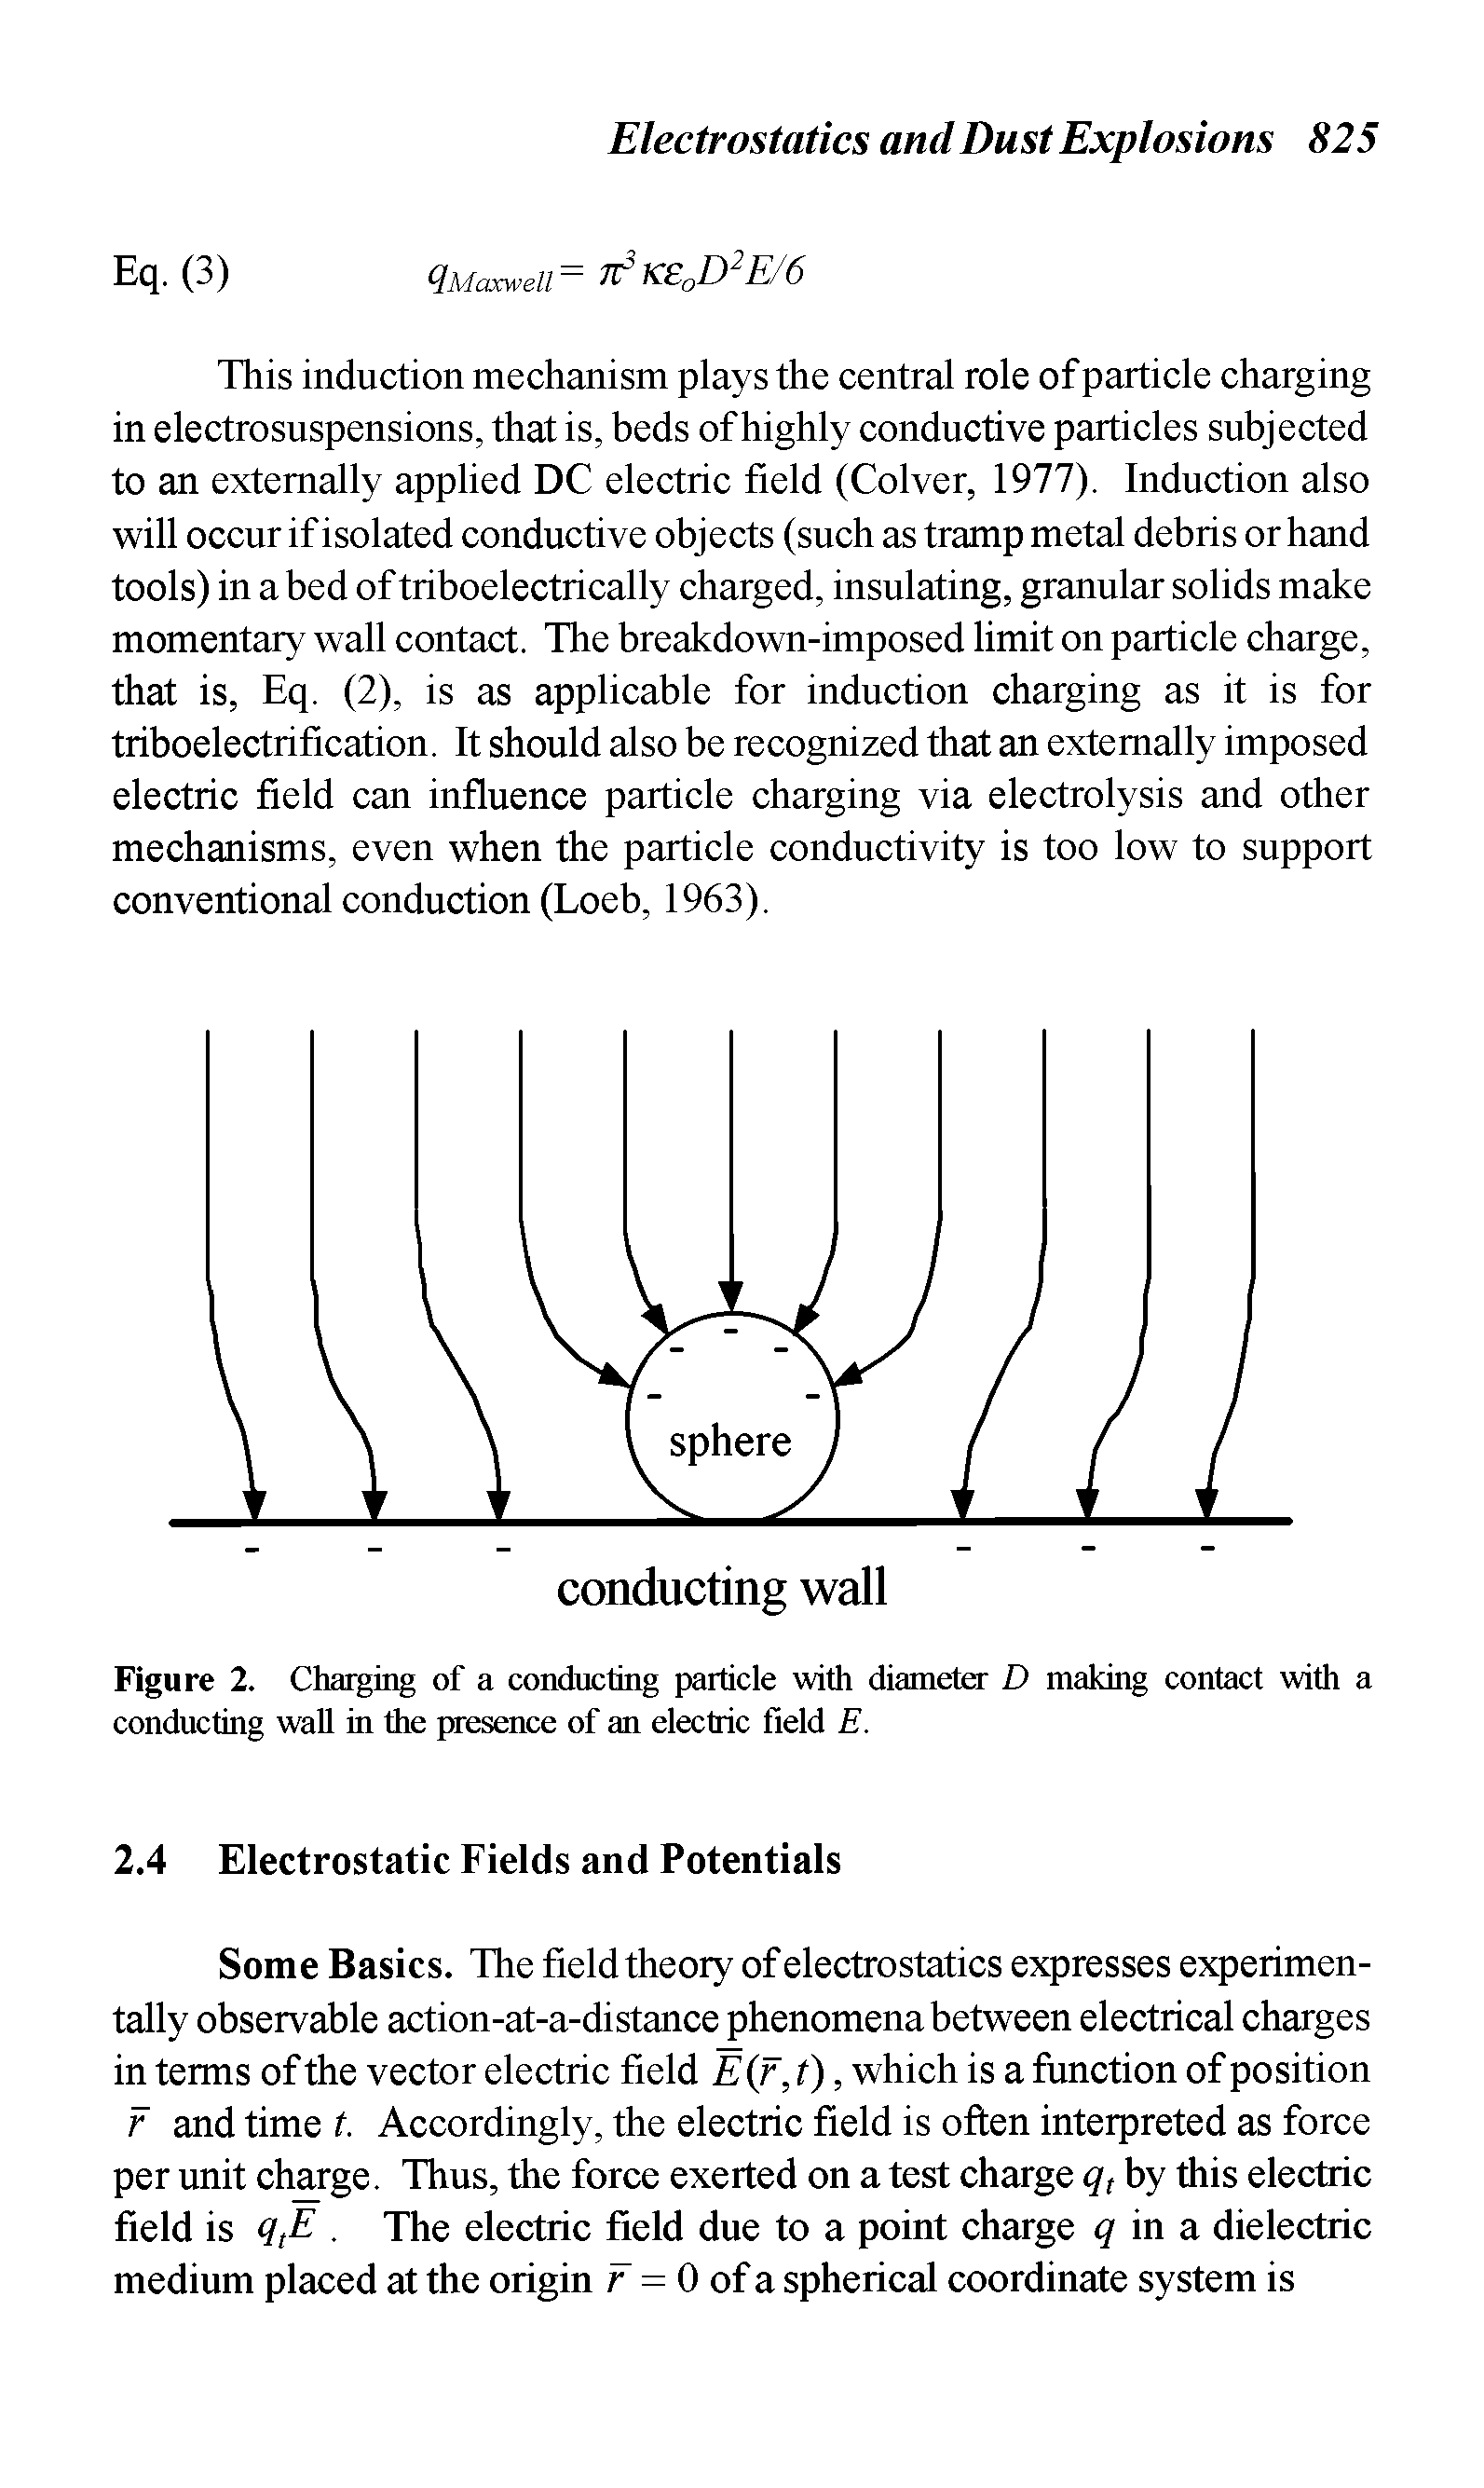 Figure 2. Charging of a conducting particle with diameter D making contact with a conducting wall in the presence of an electric field E.